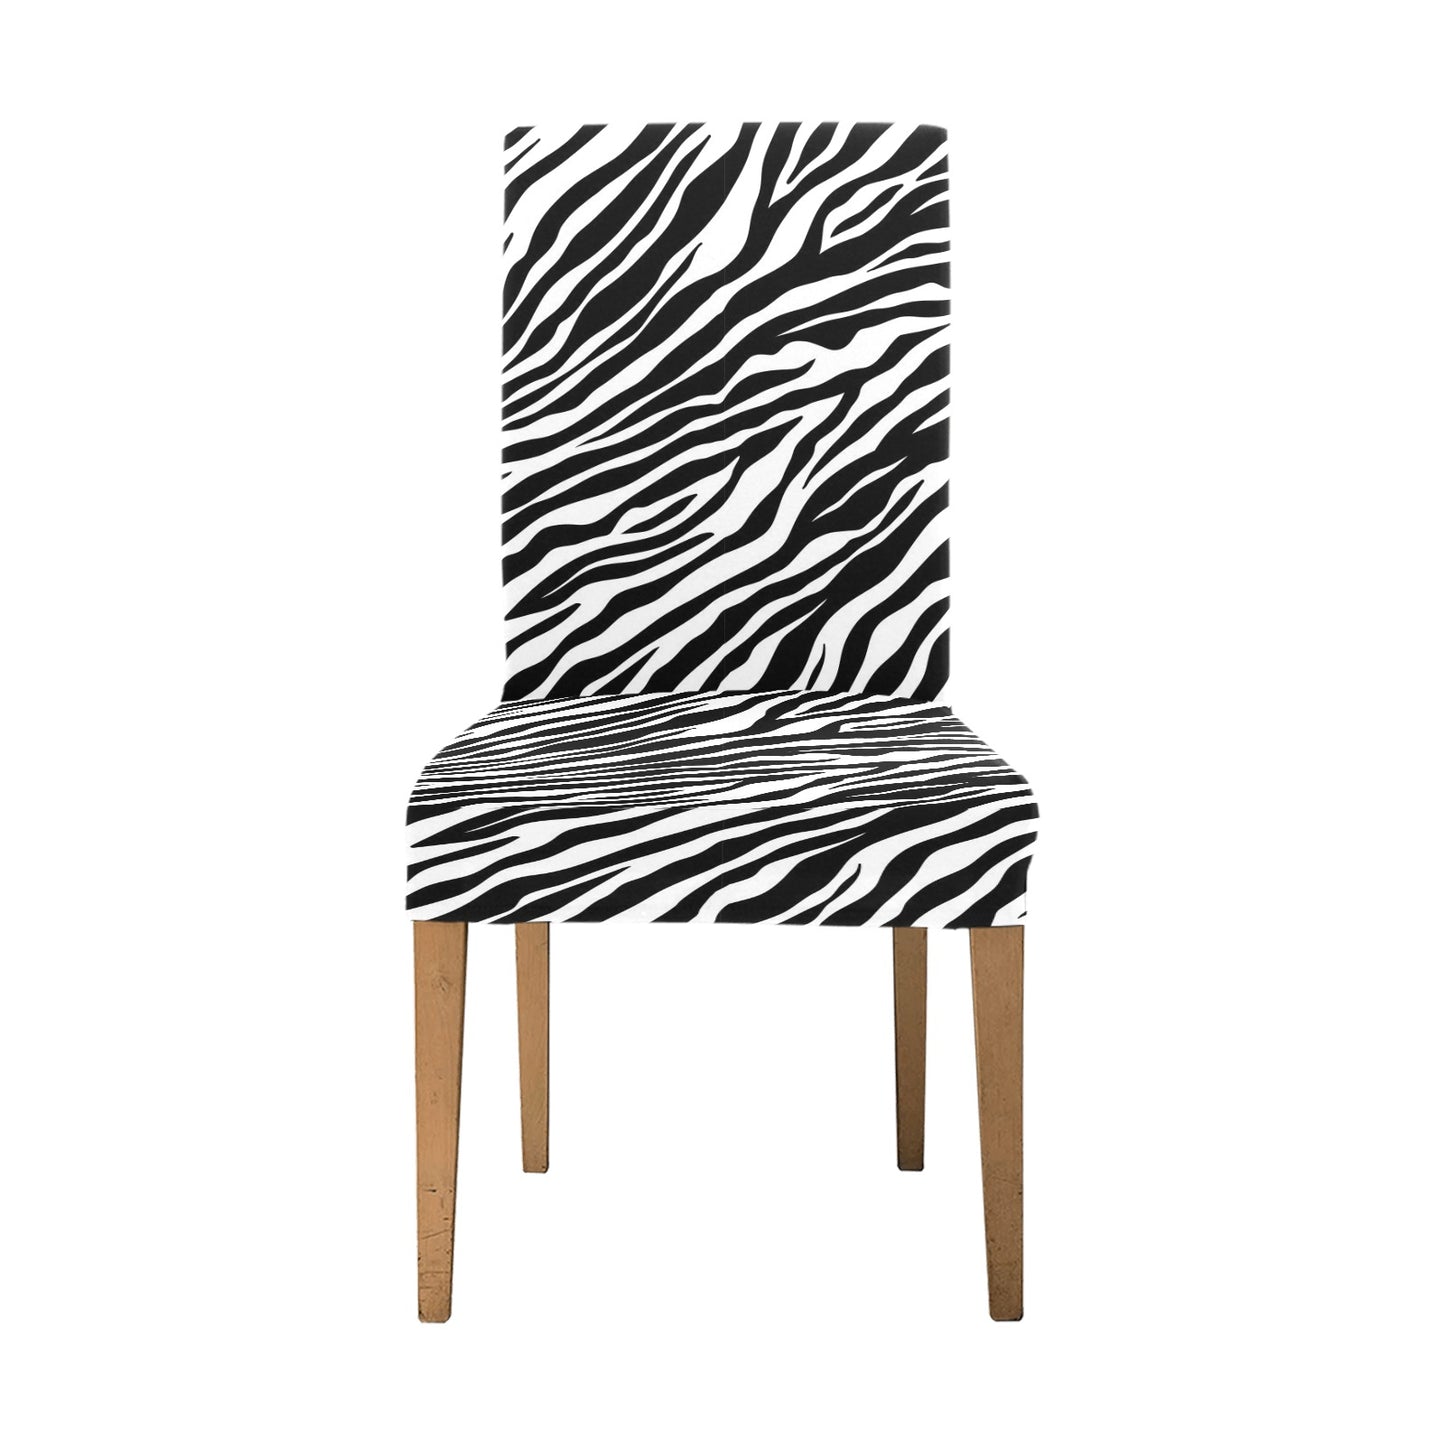 Zebra Dining Chair Seat Covers, Black White Animal Print Stretch Slipcover Furniture Dining Room Home Decor Starcove Fashion